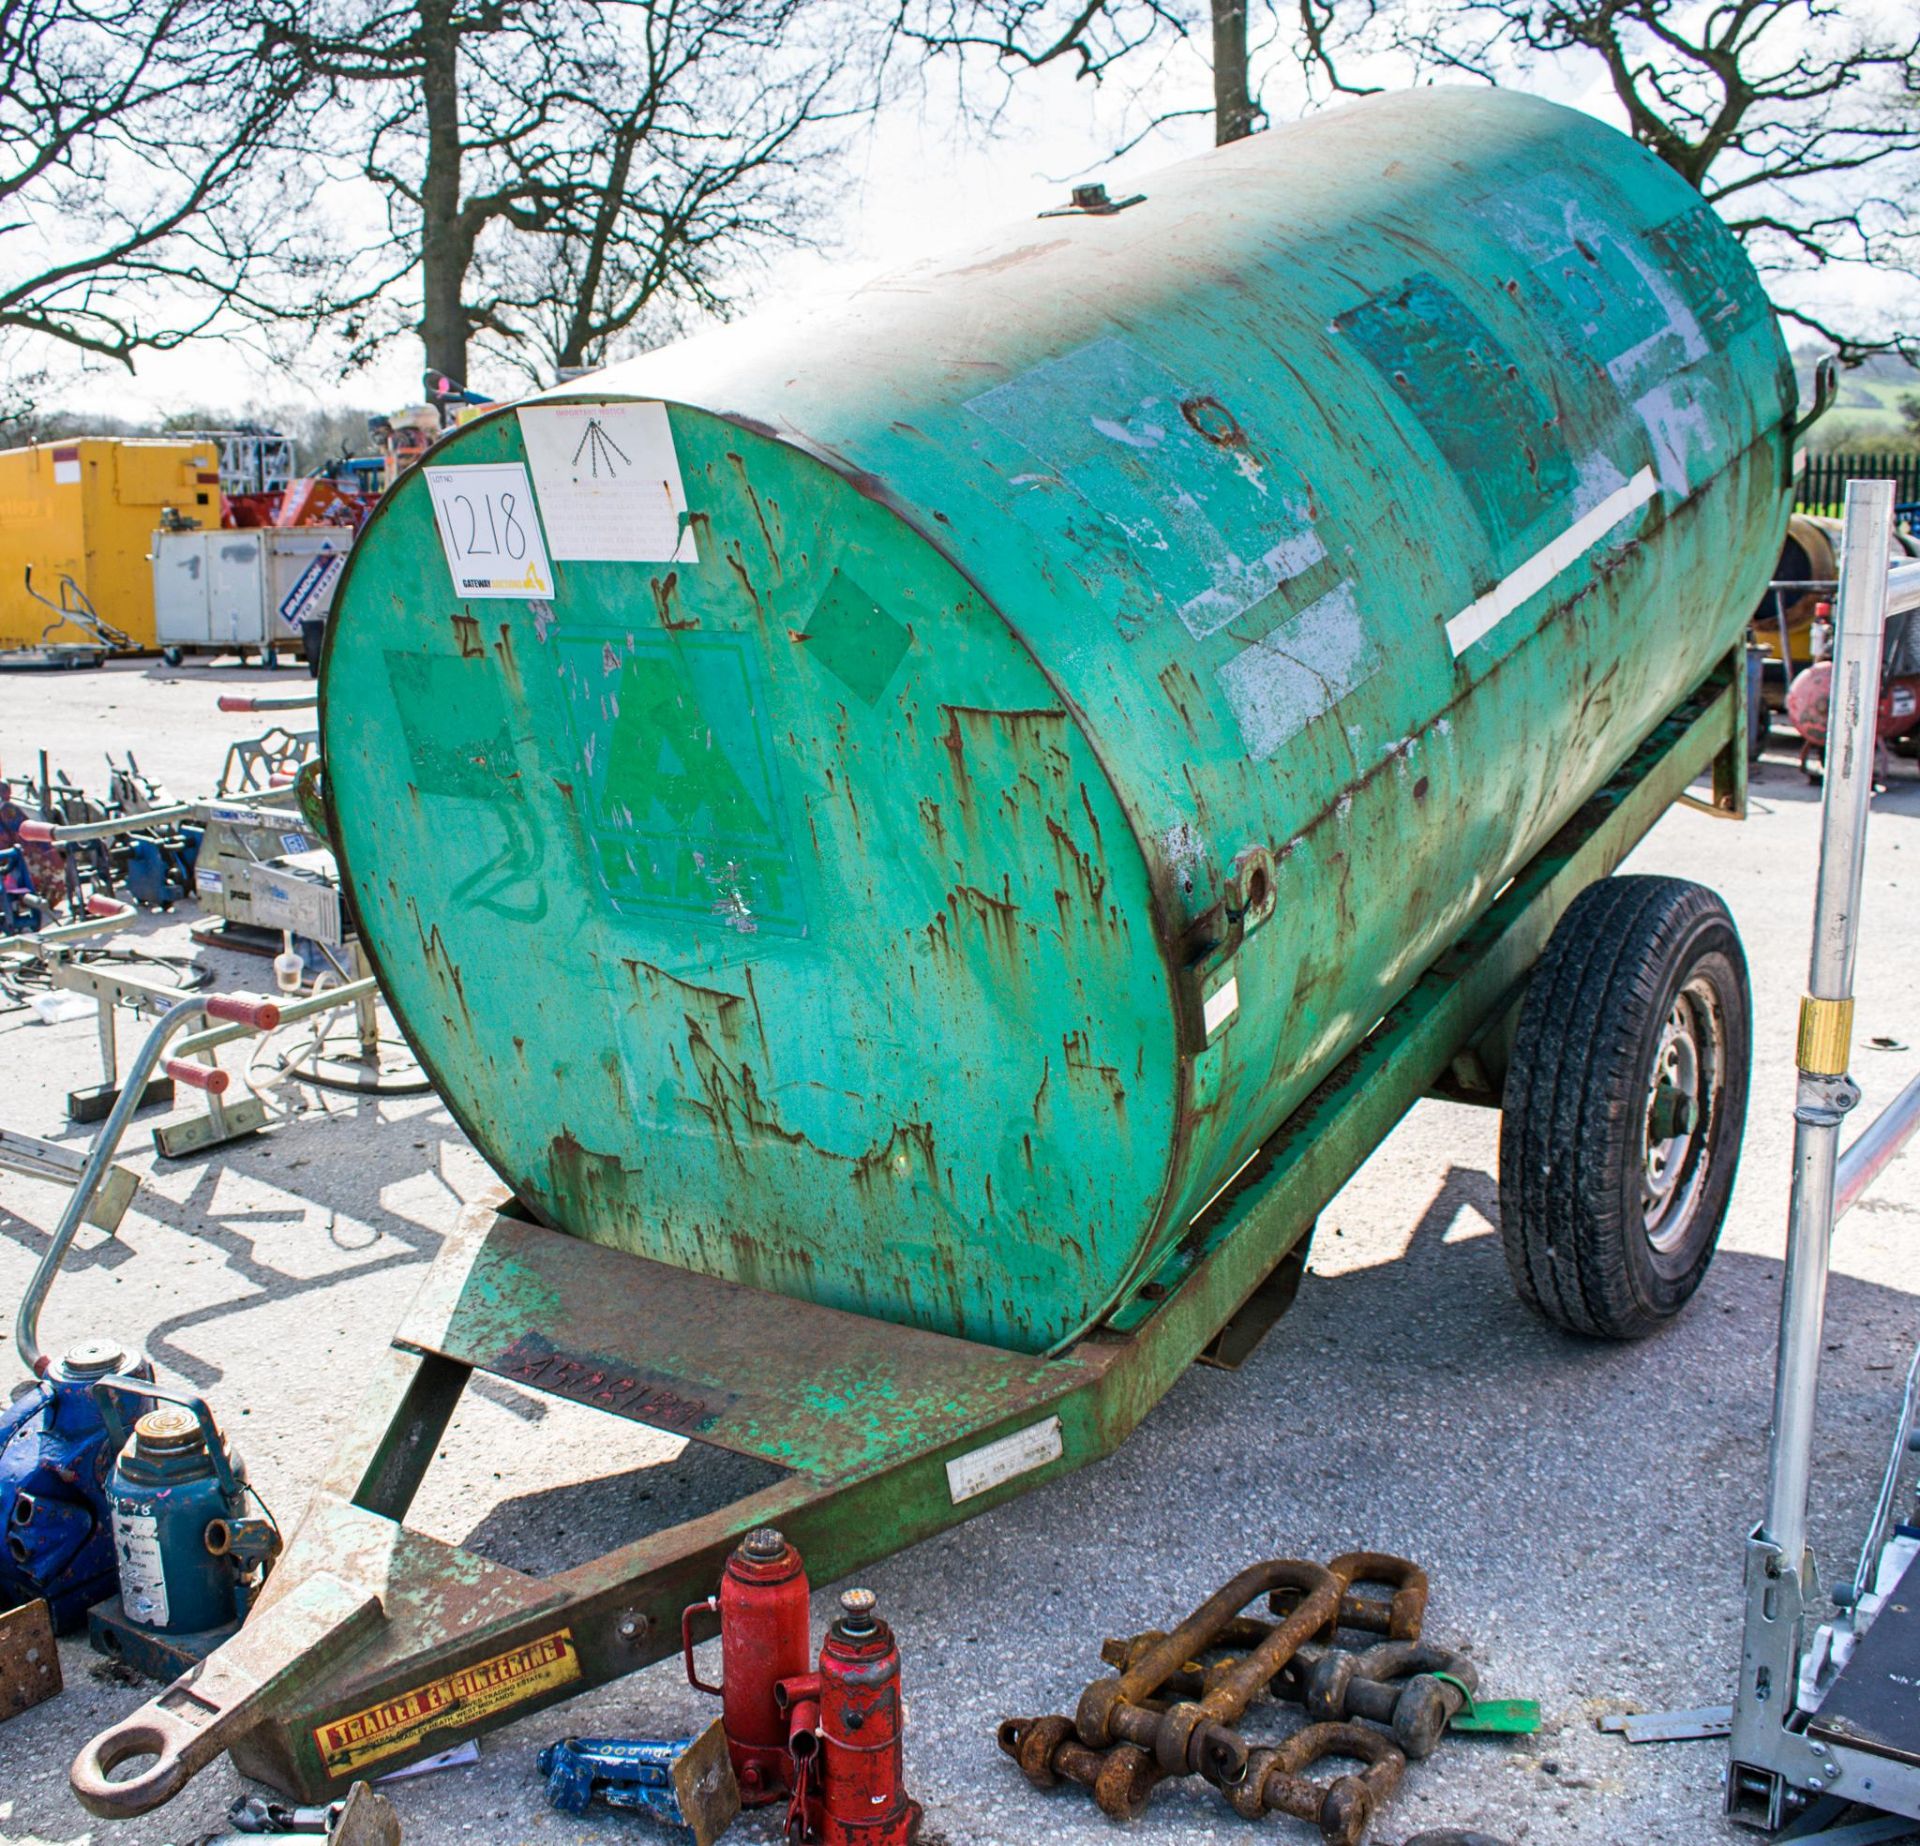 Trailer Engineering 950 litre site tow bunded fuel bowser c/w manual pump, delivery hose & nozzle